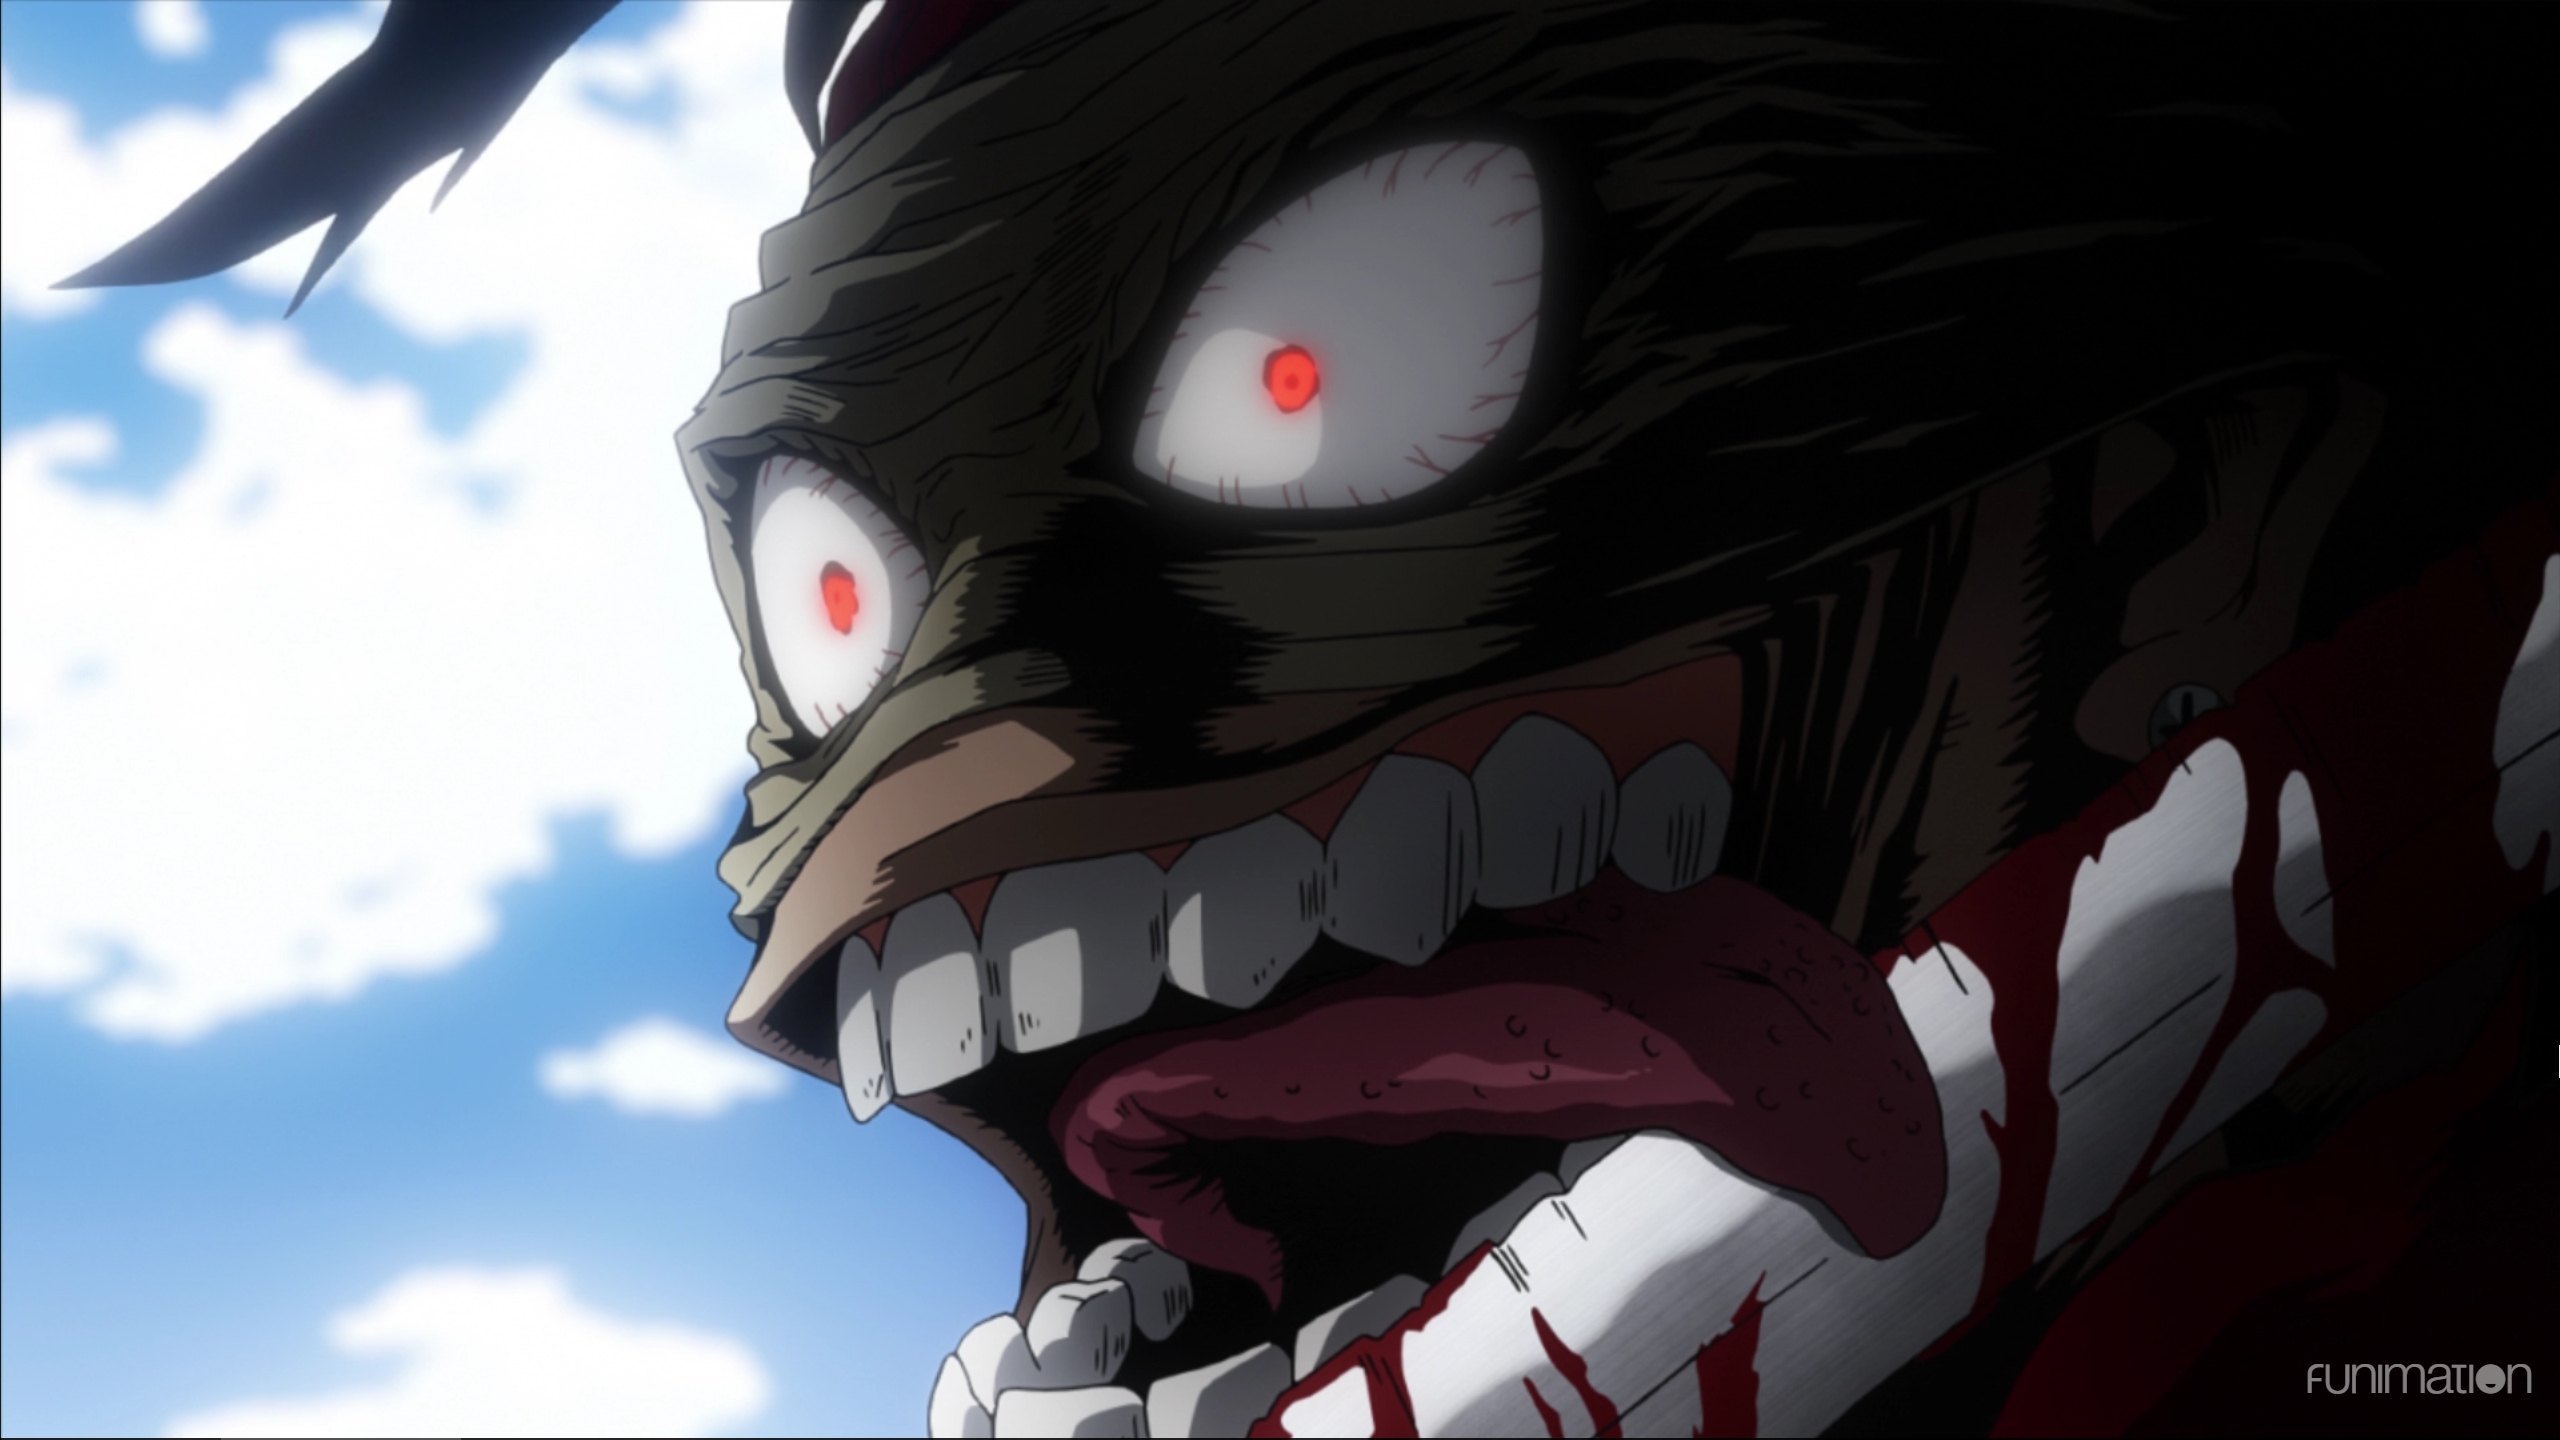 My Hero Academia Season 2 Ep. 11 Link and Discussion